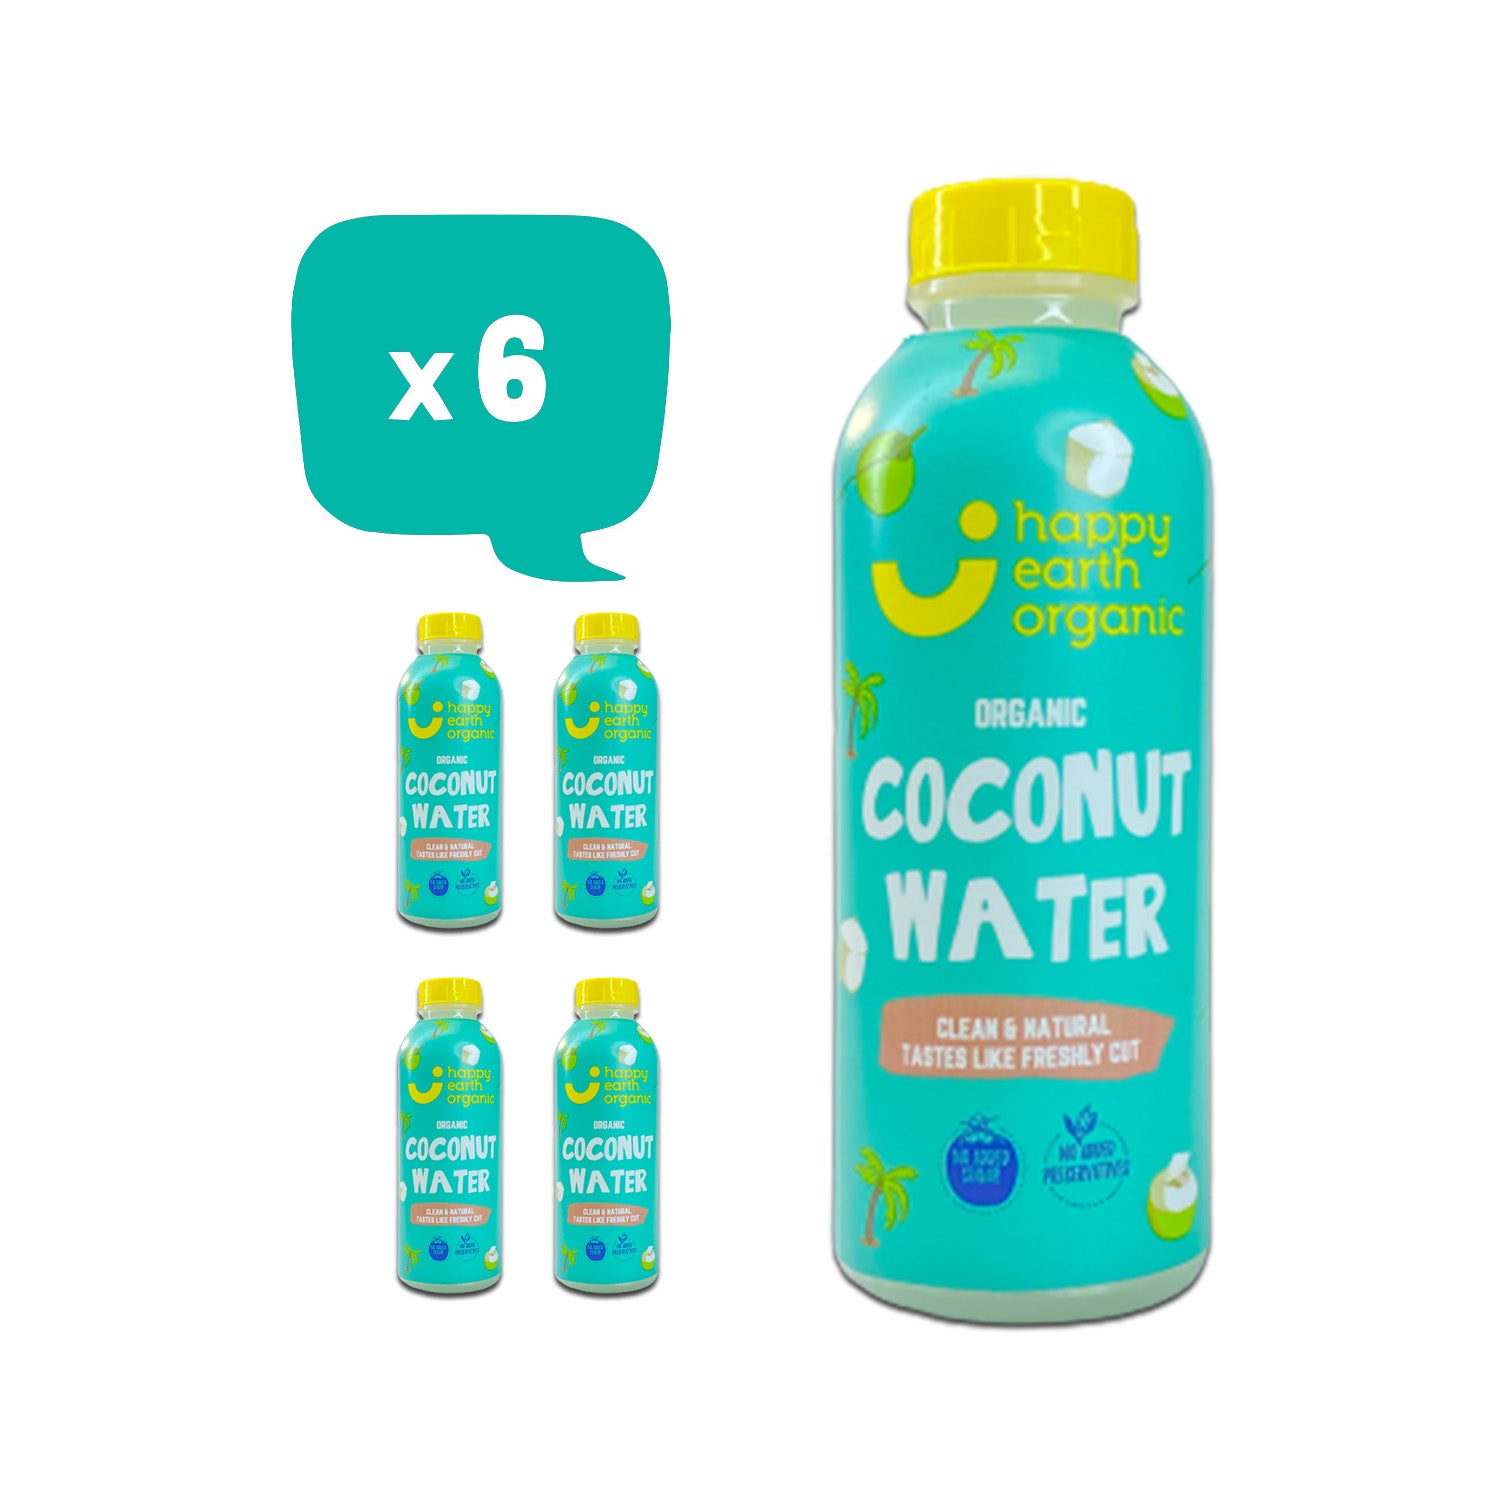 HAPPY EARTH Organic Coconut Water, 250ml (Pack of 6) - Organic, Natural